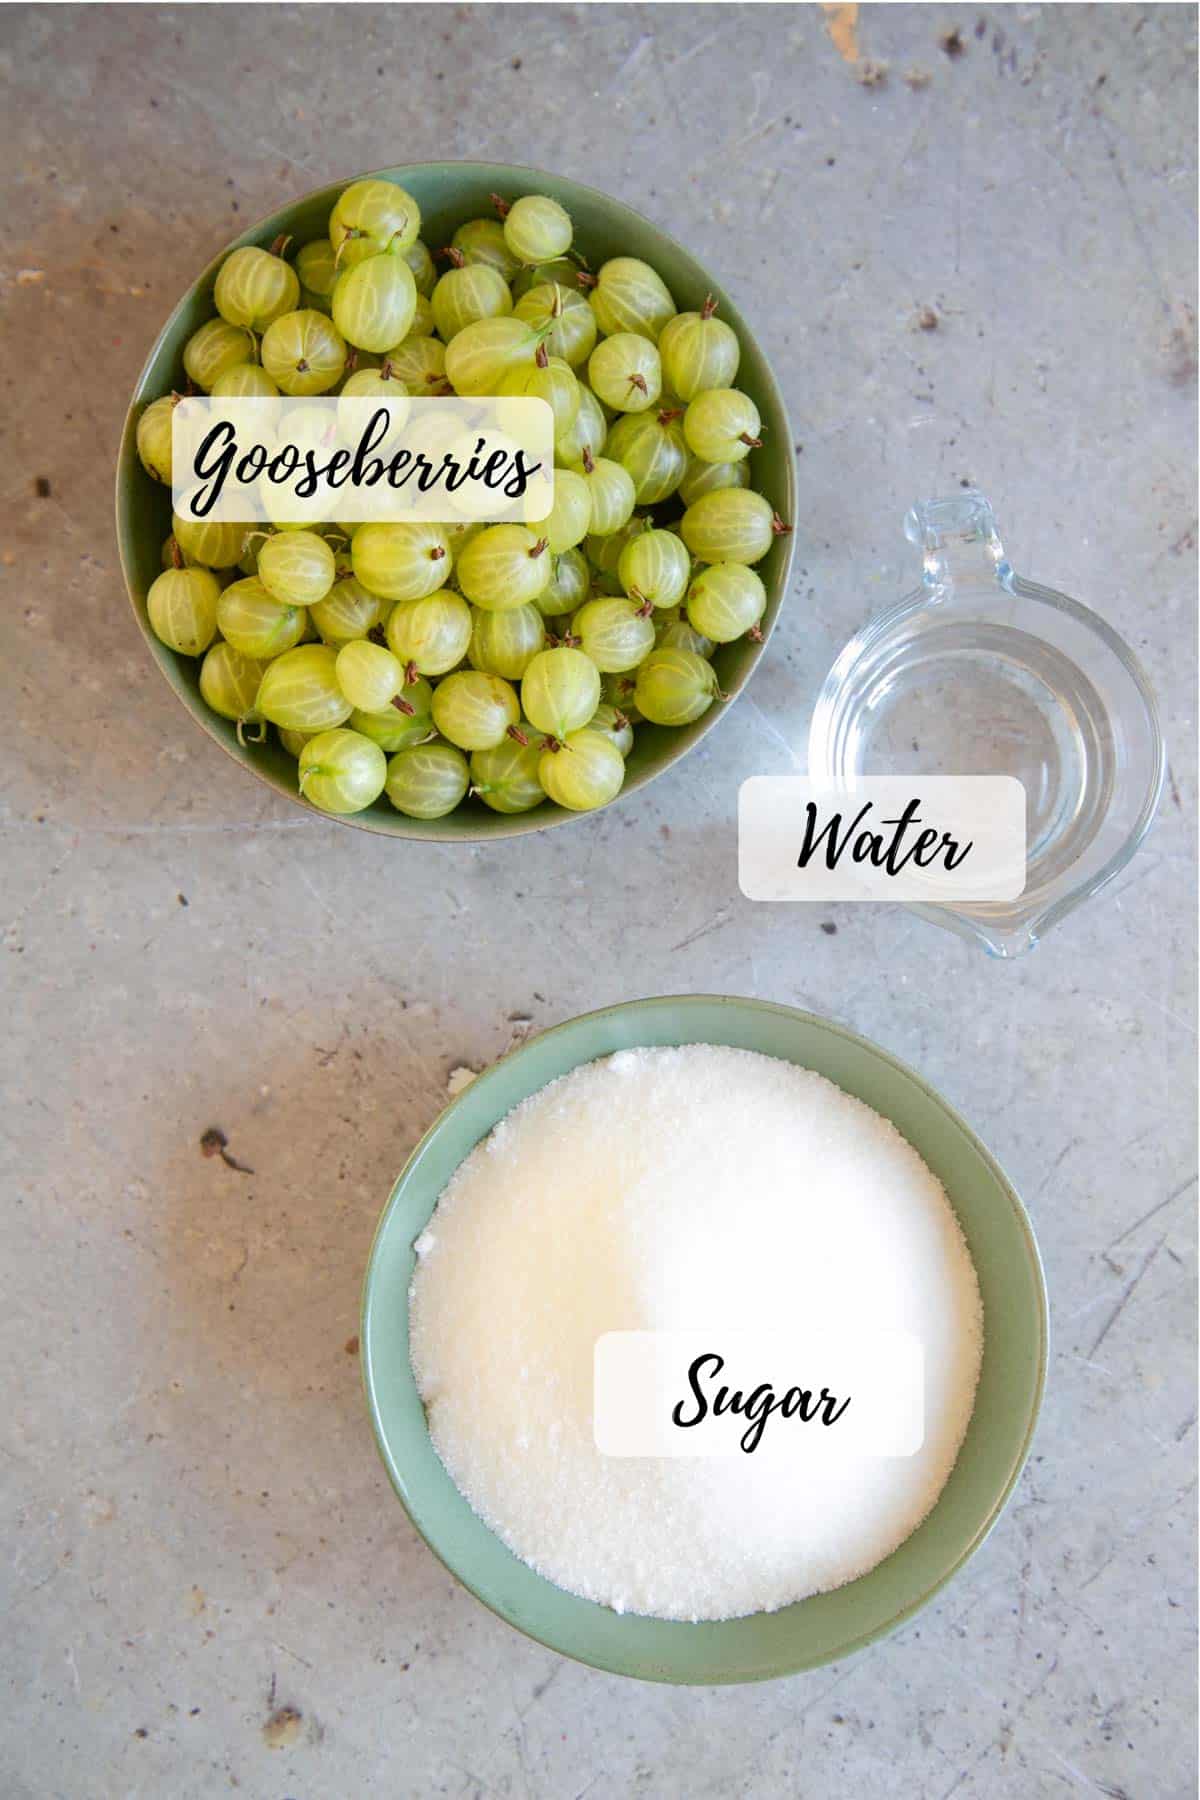 Ingredients for Gooseberry jam - bowls of gooseberries and sugar and a jug of water